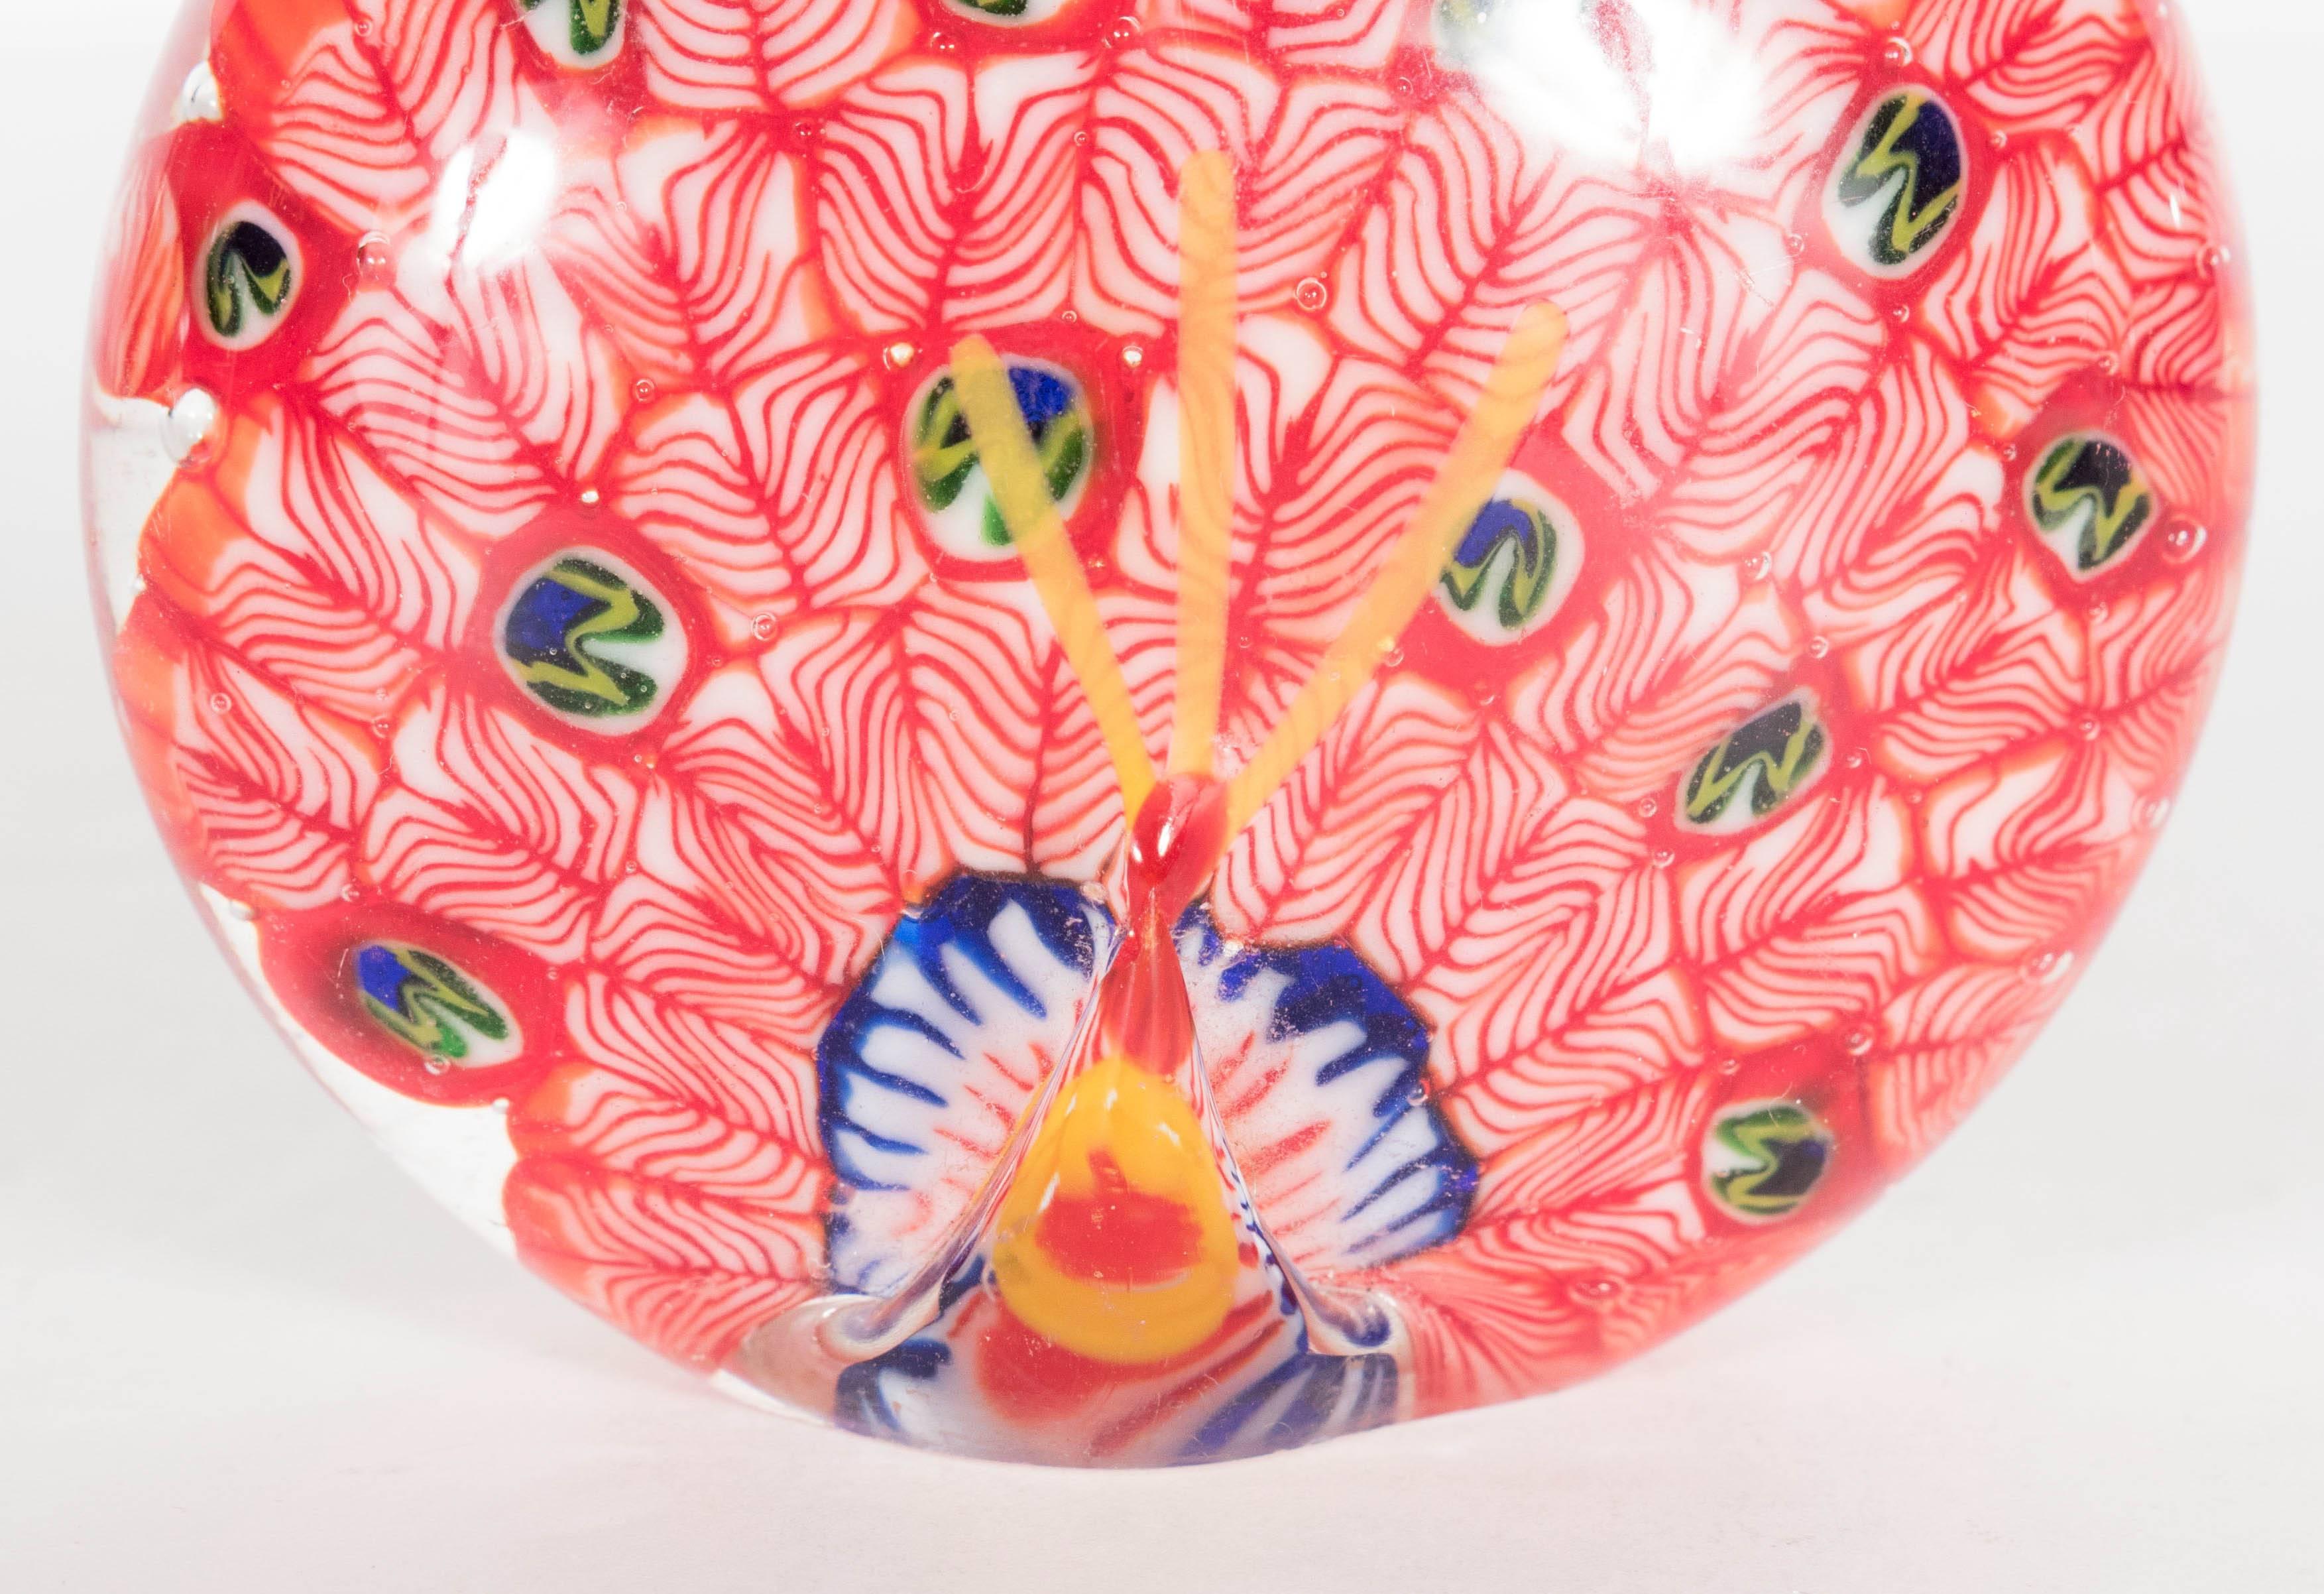 Mid-Century Modernist Murano peacock paperweight. Patterned red and white ribbon swirls adorn the piece, which are suspended in clear glass. This handblown piece of Italian art glass is in fine vintage condition.